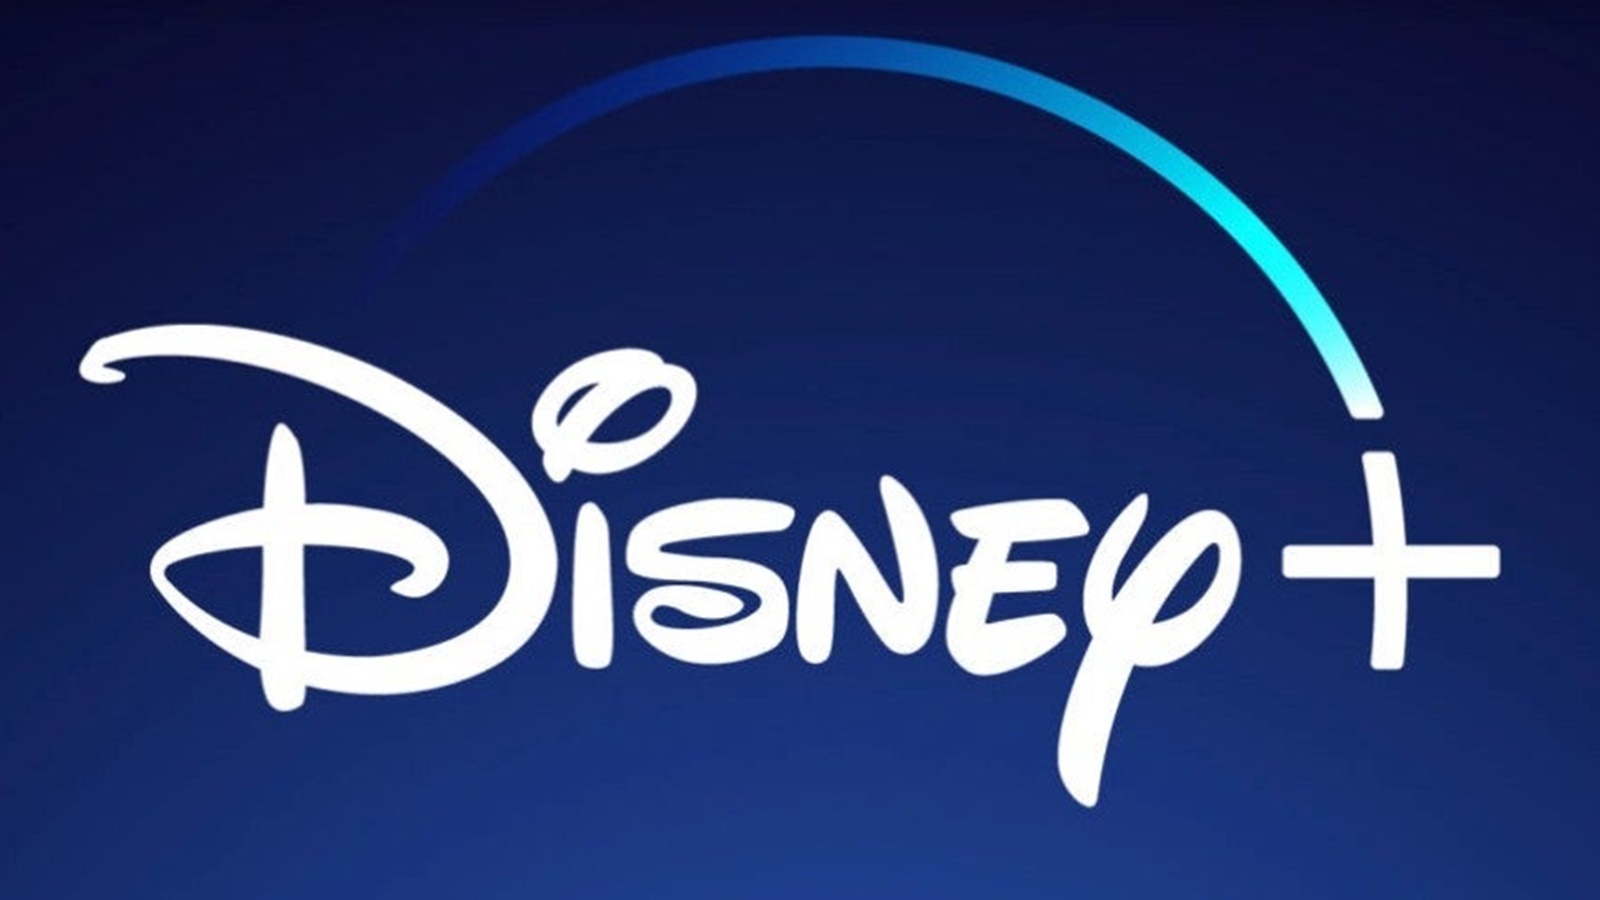 Disney+ loses 4 million subscribers, but gains 2% internationally